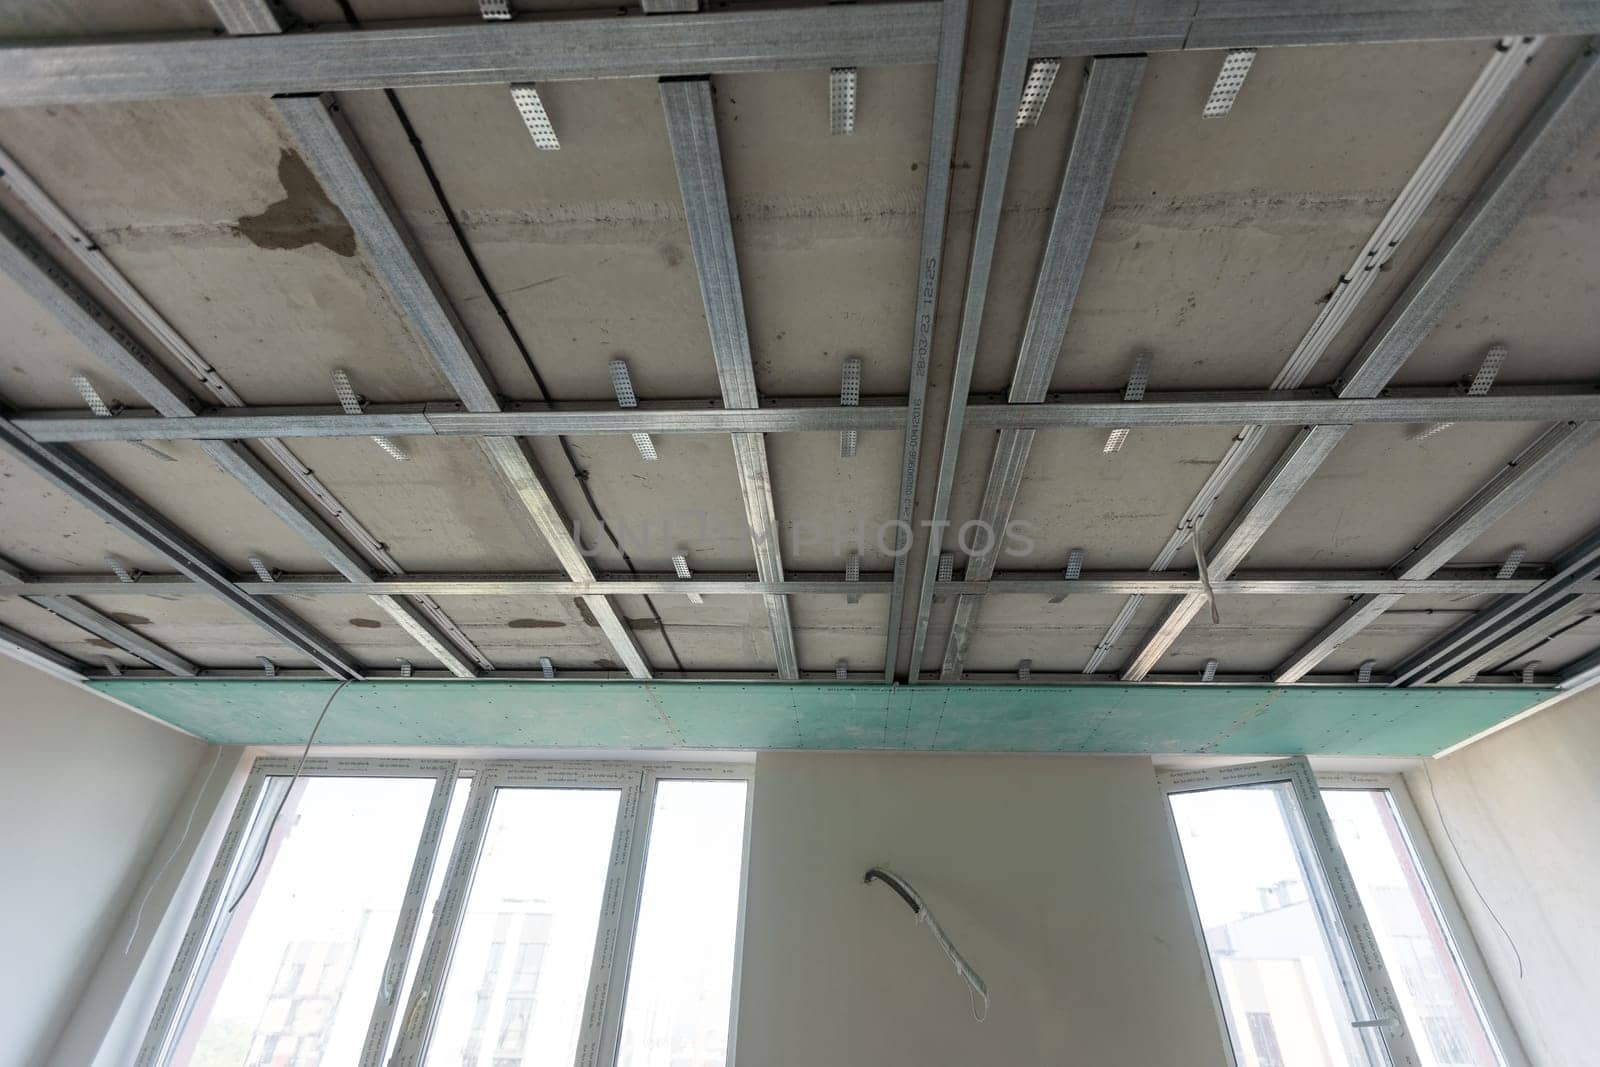 The metal frame of the ceiling, sound insulation, in the process of repairing an apartment. High quality photo